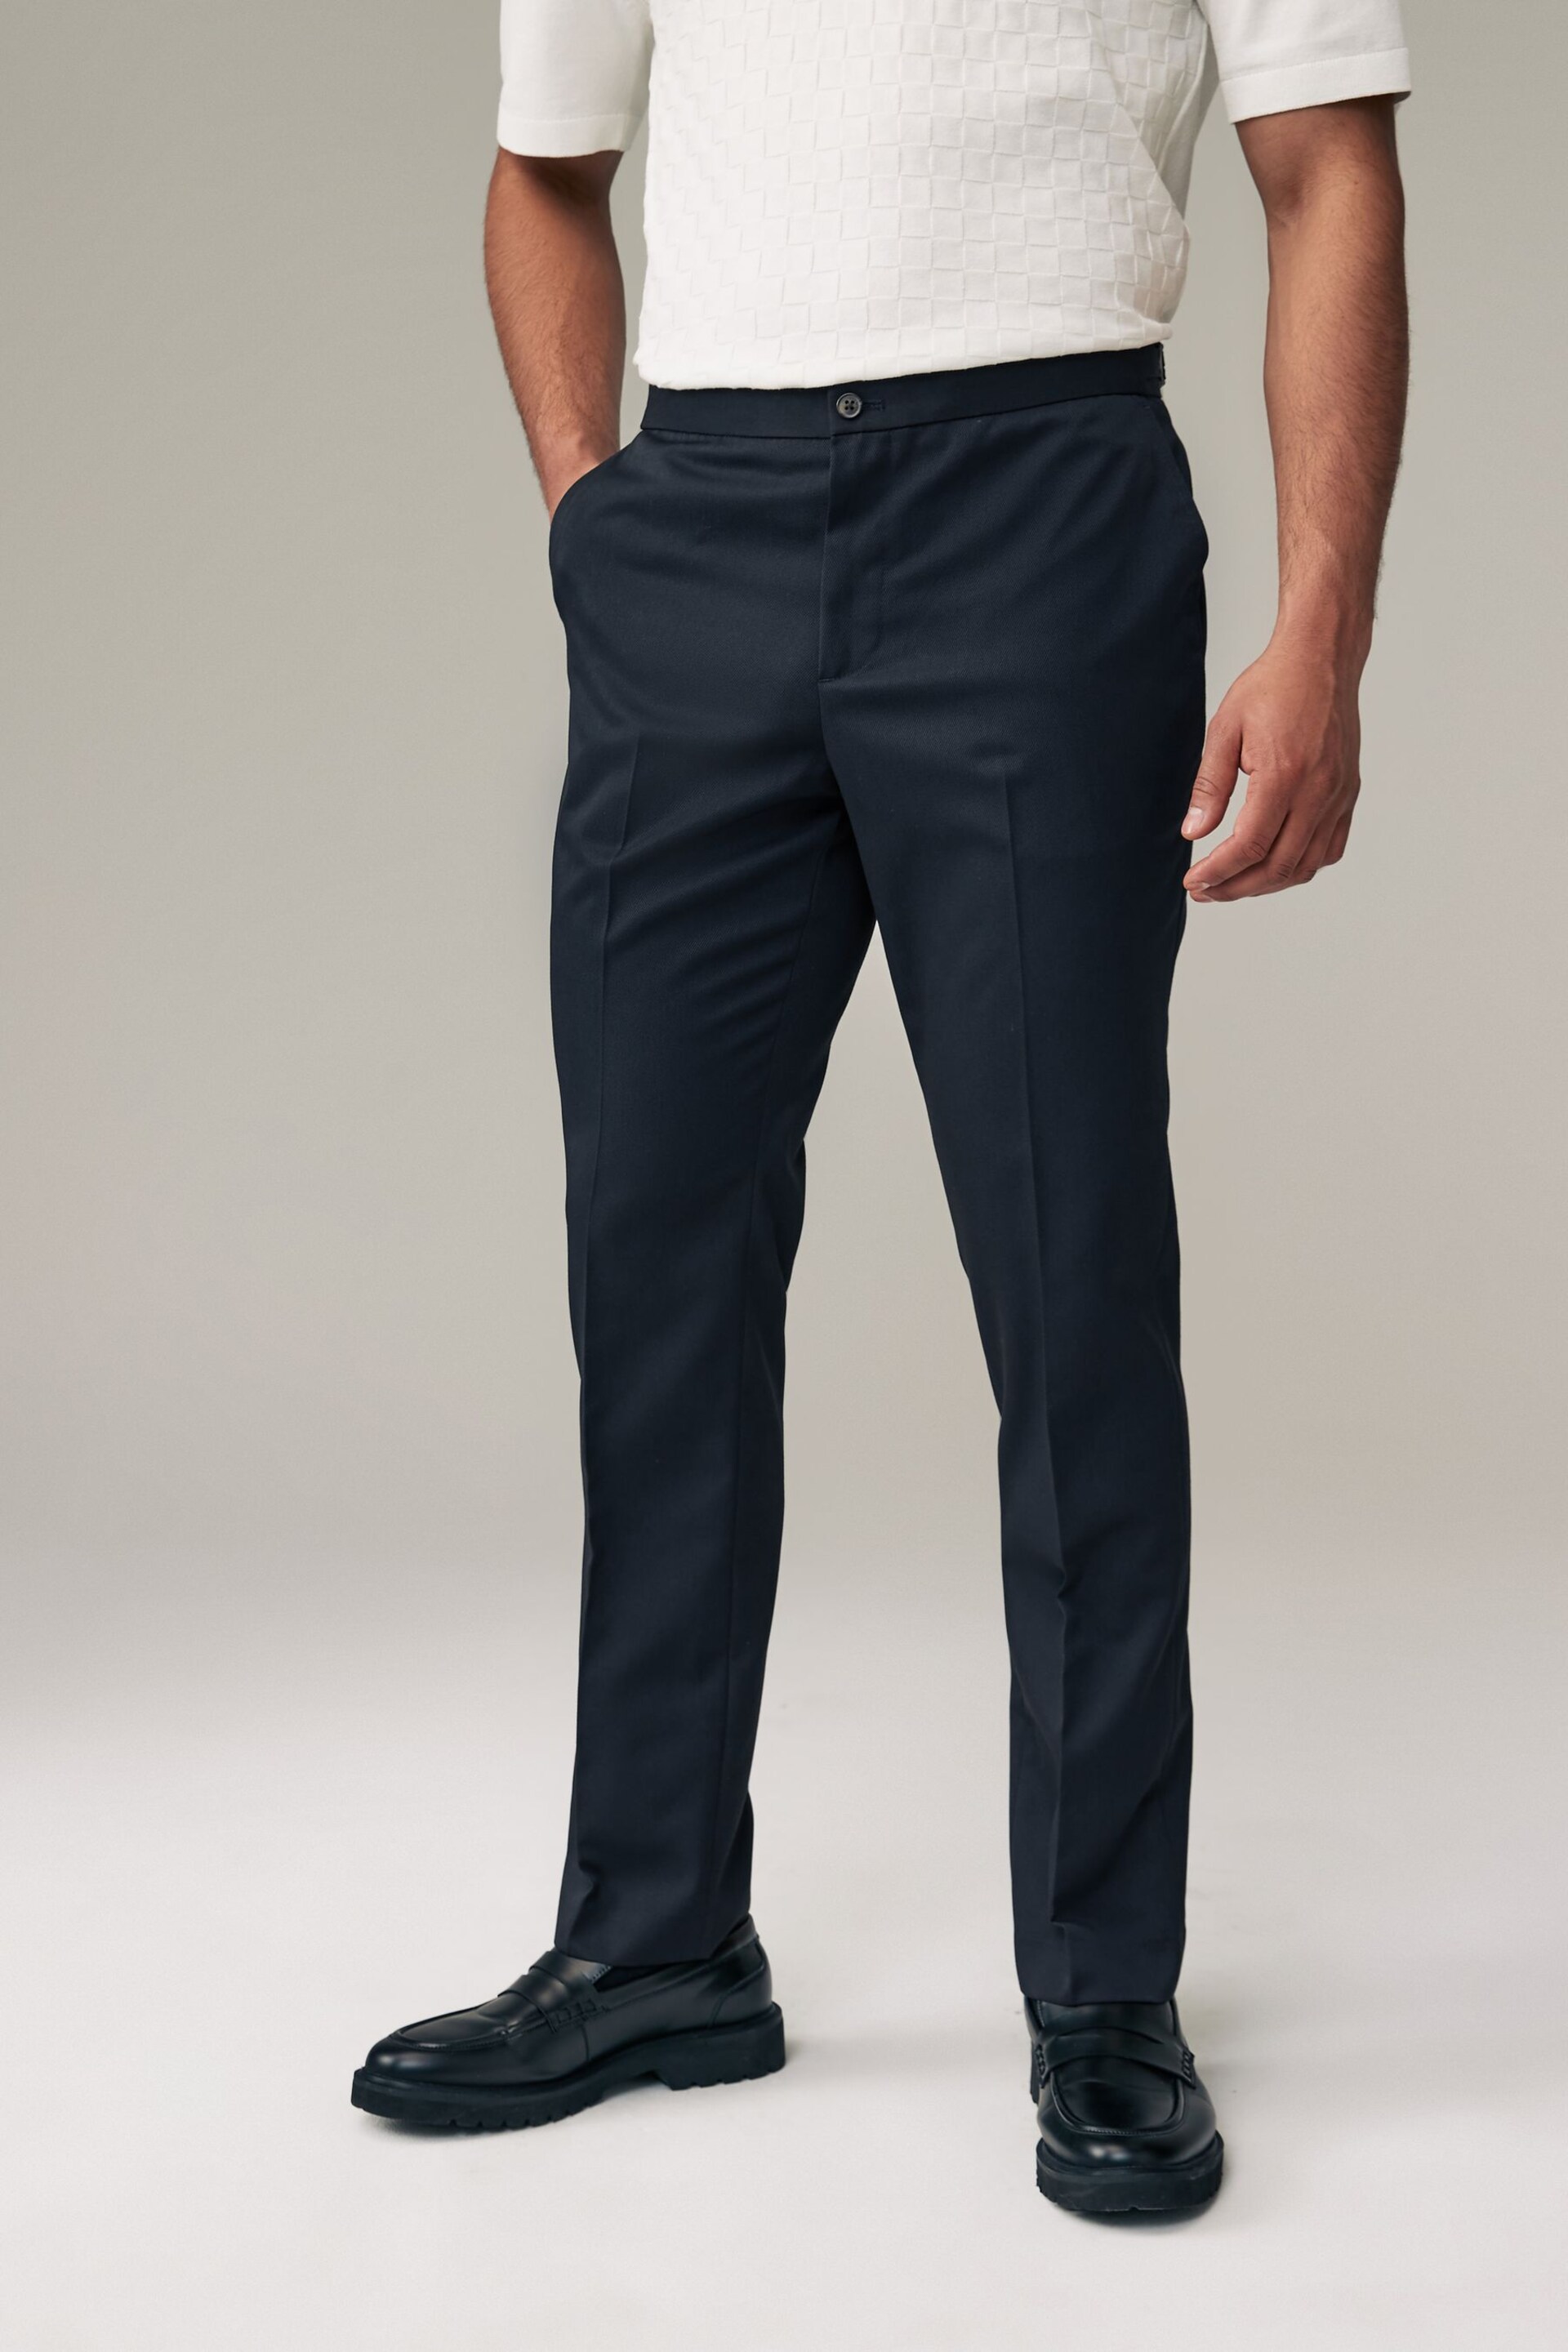 Navy Blue Slim Fit Smart Twill Side Adjuster Trousers - Image 1 of 9